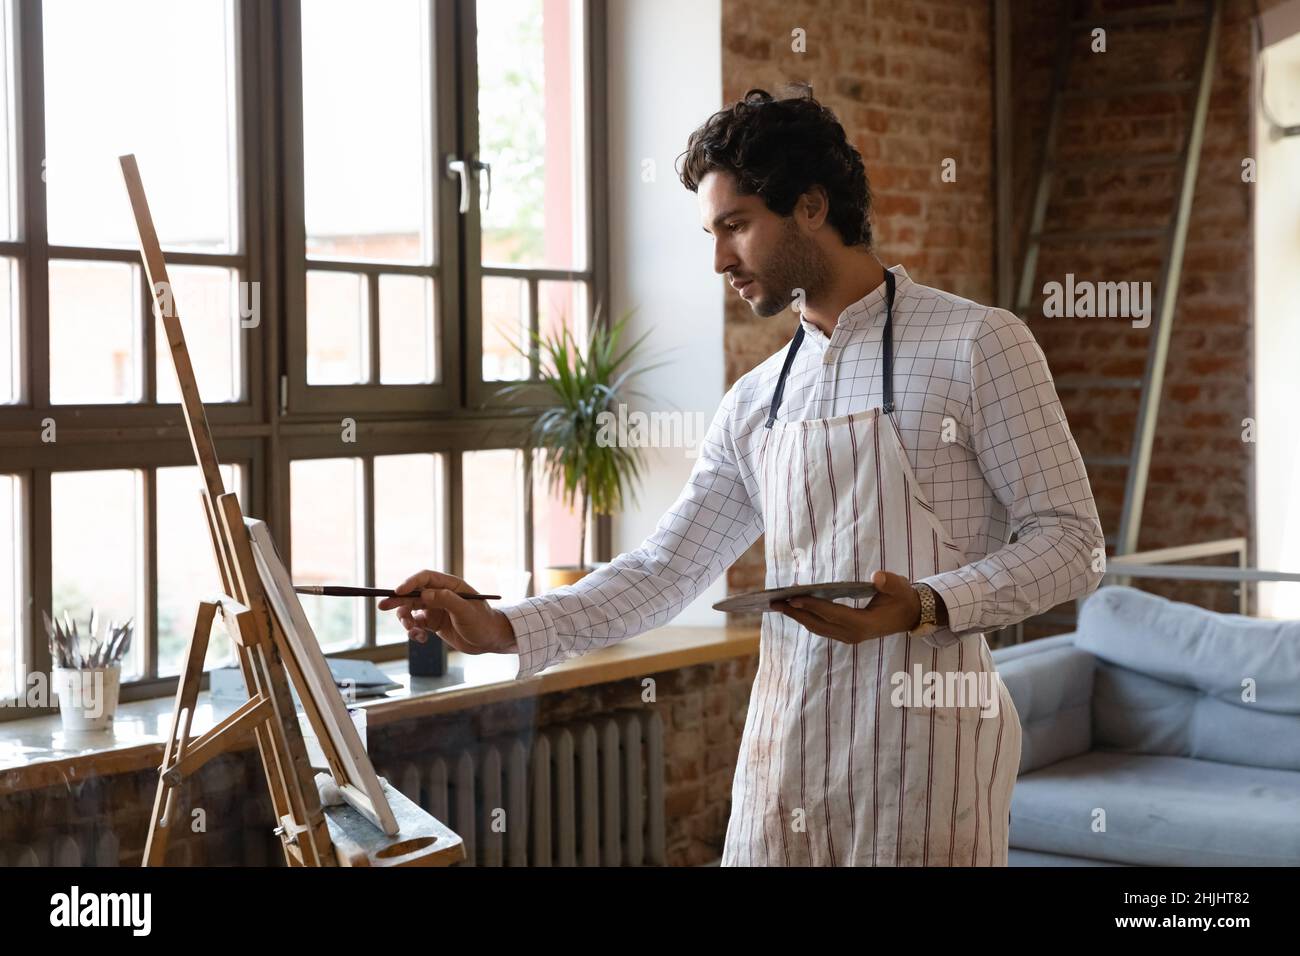 Thoughtful inspired young artist guy drawing at easel Stock Photo